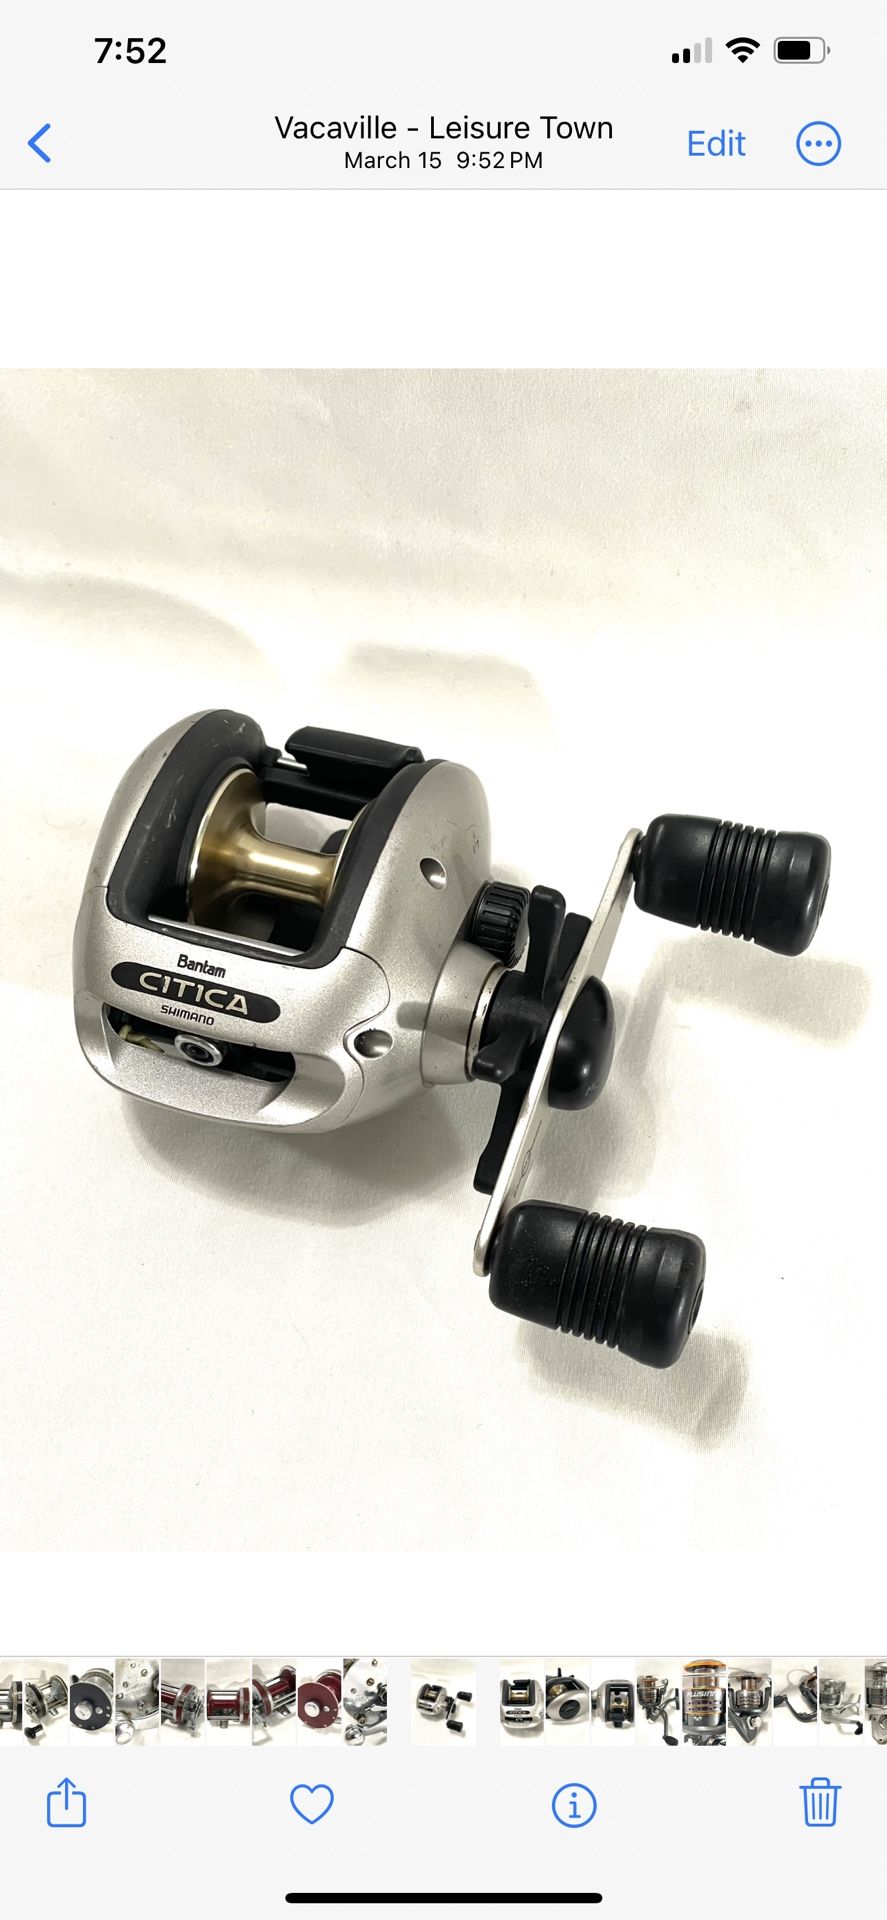 Great Condition Shimano Citica C-1201 Bait Caster  Fishing Reel